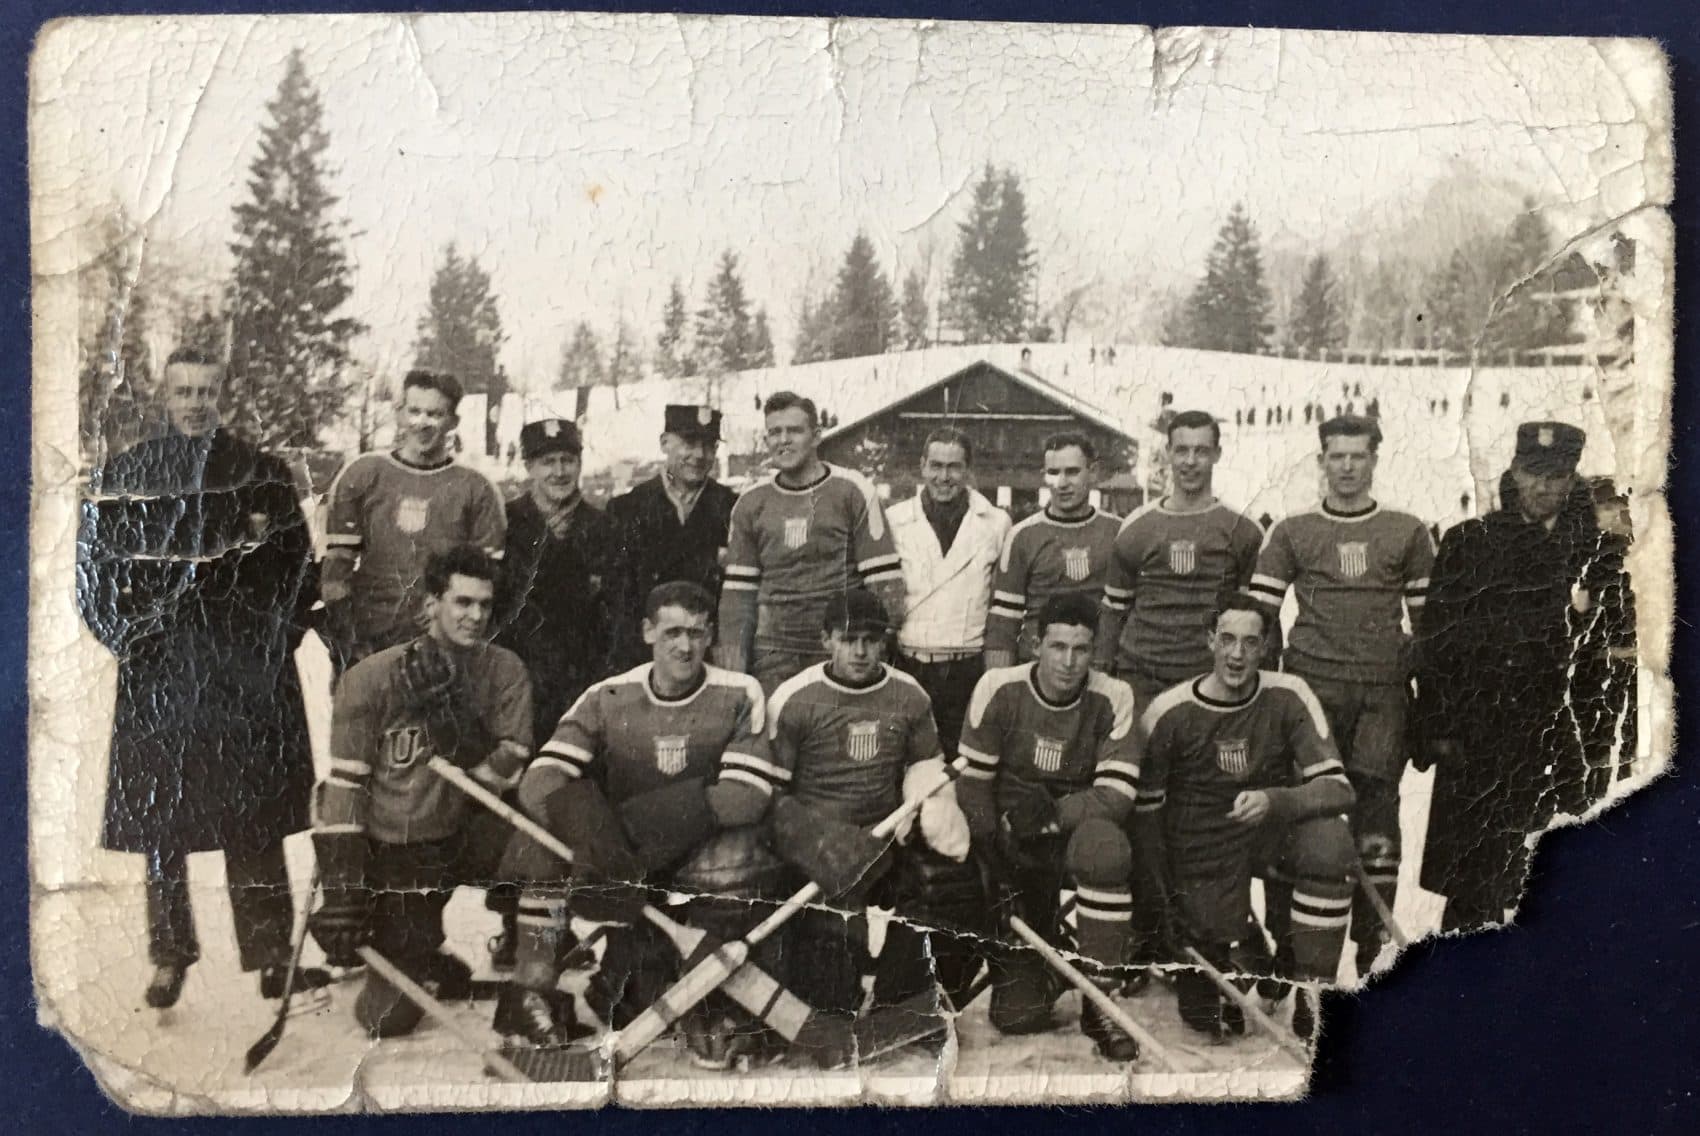 The 1936 U.S. Olympic hockey team in Germany. Francis Baker is third from the left in the front and Albert Prettyman is the fourth from the left in the back. (Courtesy Hamilton College)